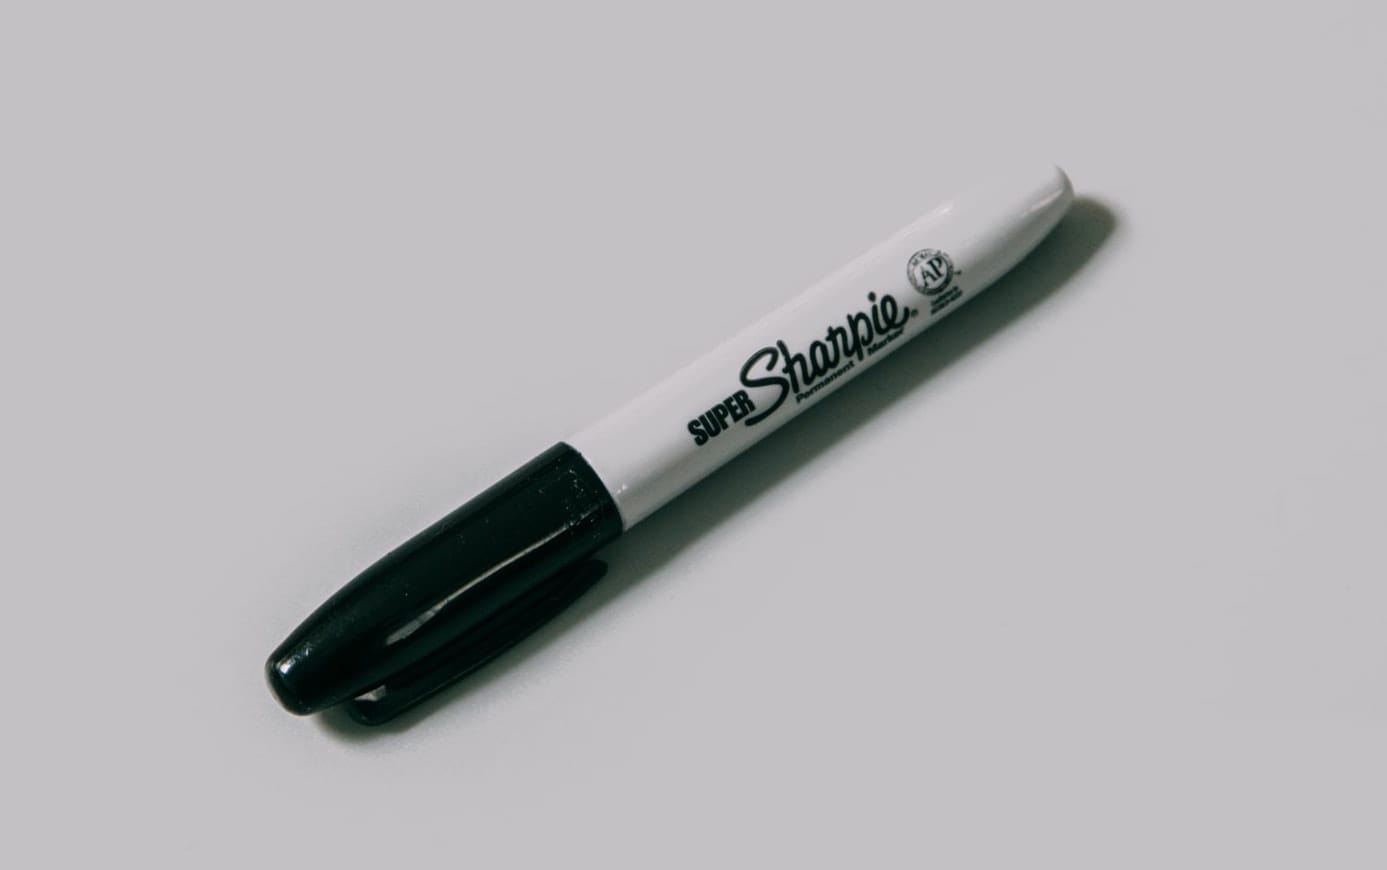 Get Permanent Marker Out Of Just About Anything With These Hacks